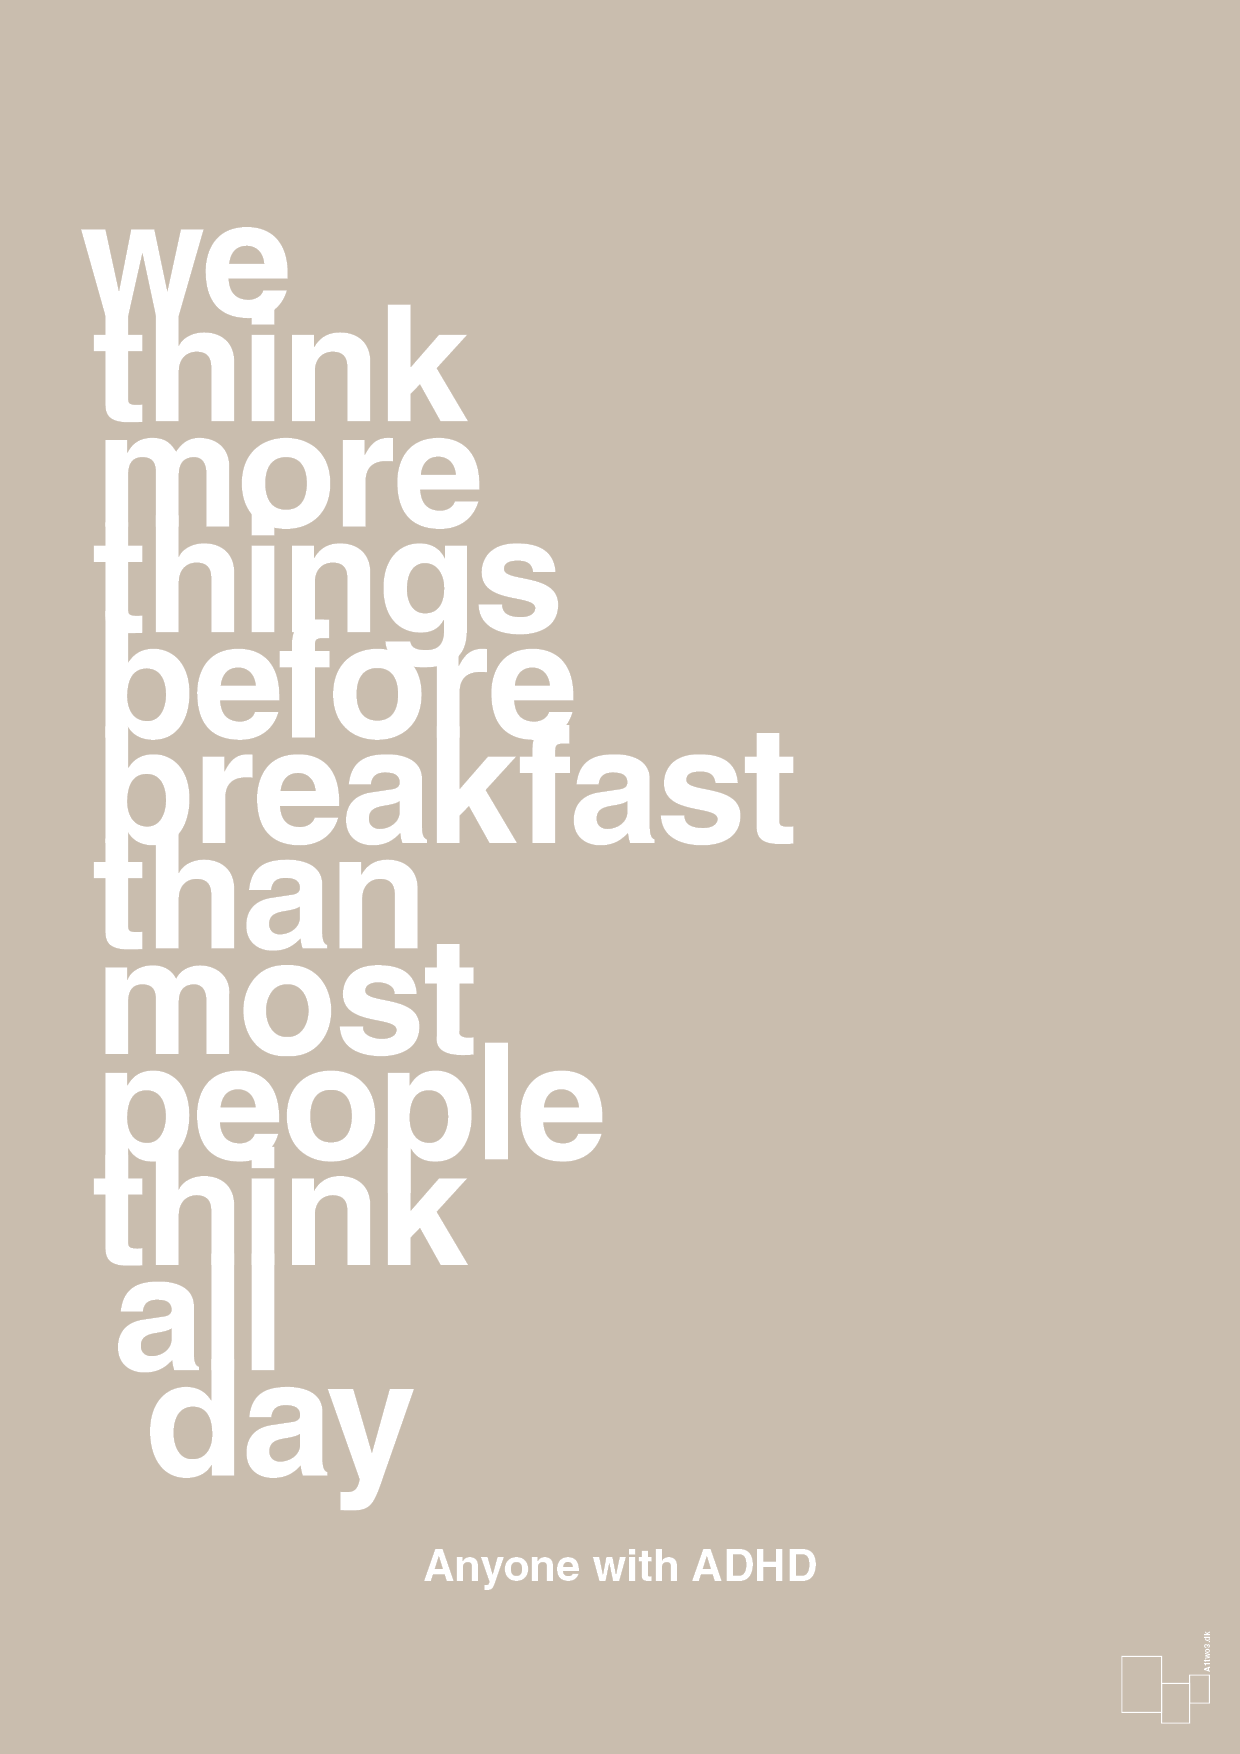 we think more things before breakfast than most people think all day - Plakat med Samfund i Creamy Mushroom